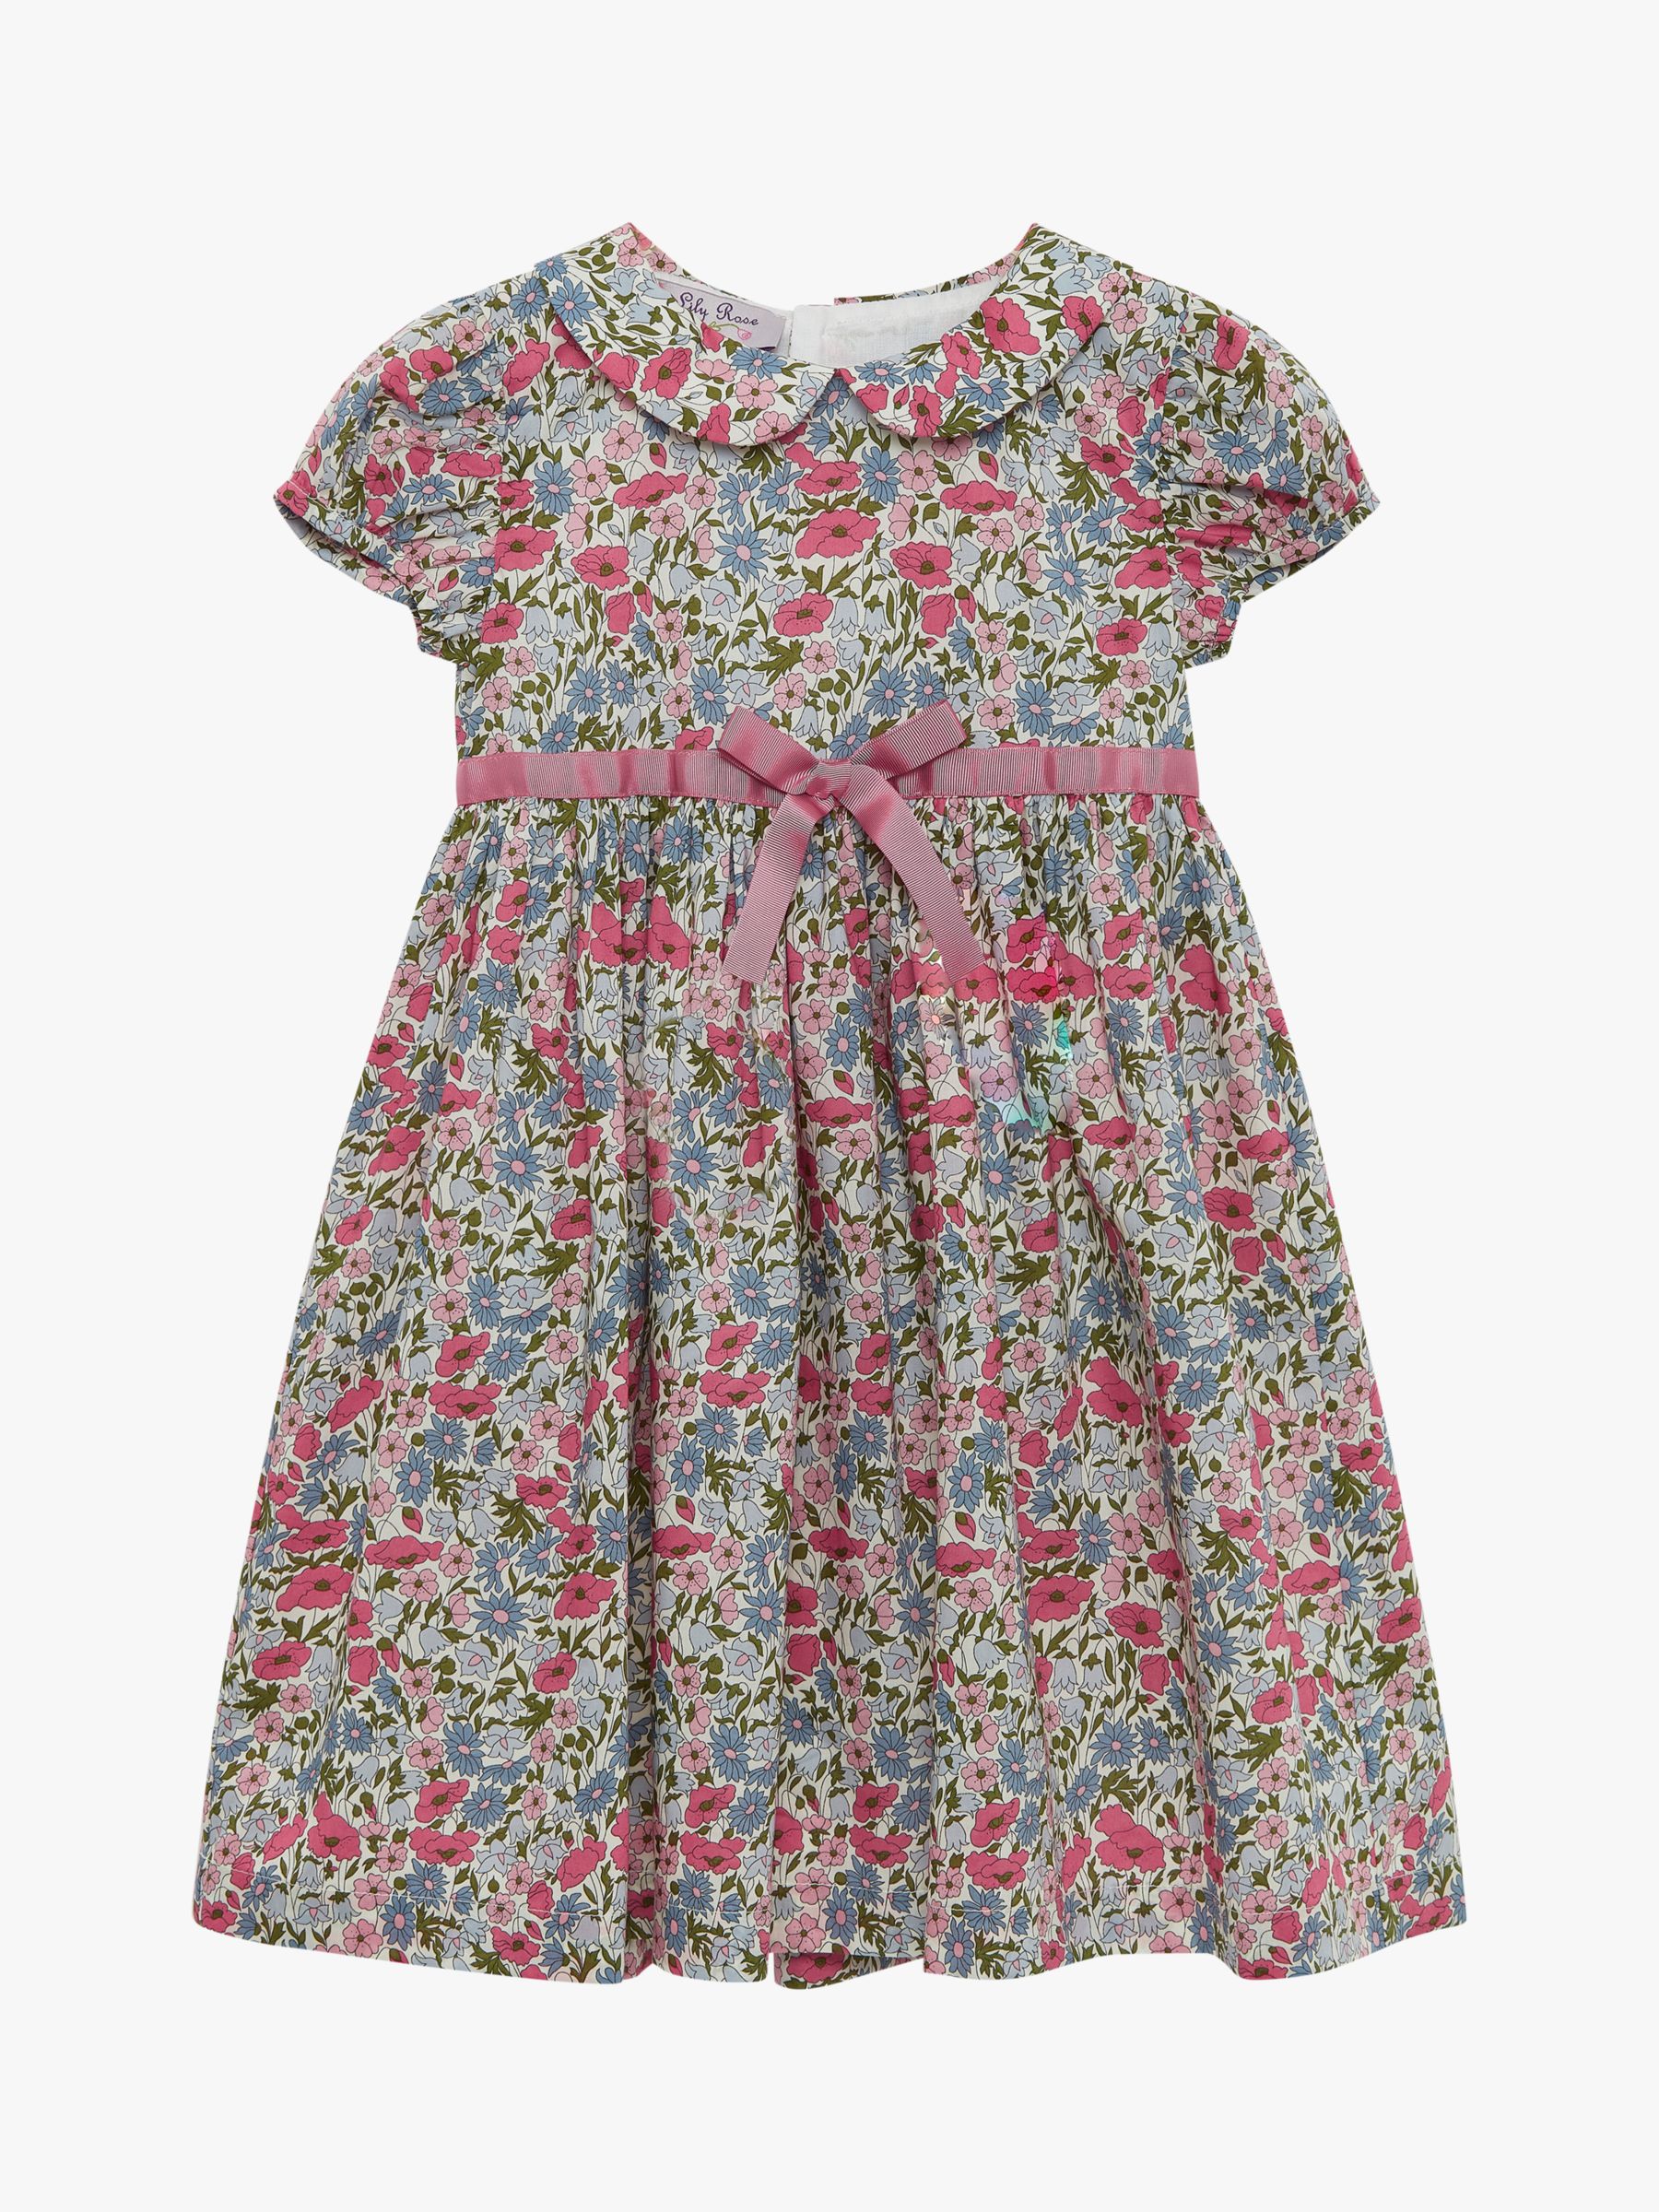 Trotters Lily Rose Poppy Kids' Cotton Dress, Pink Poppy, 2 years